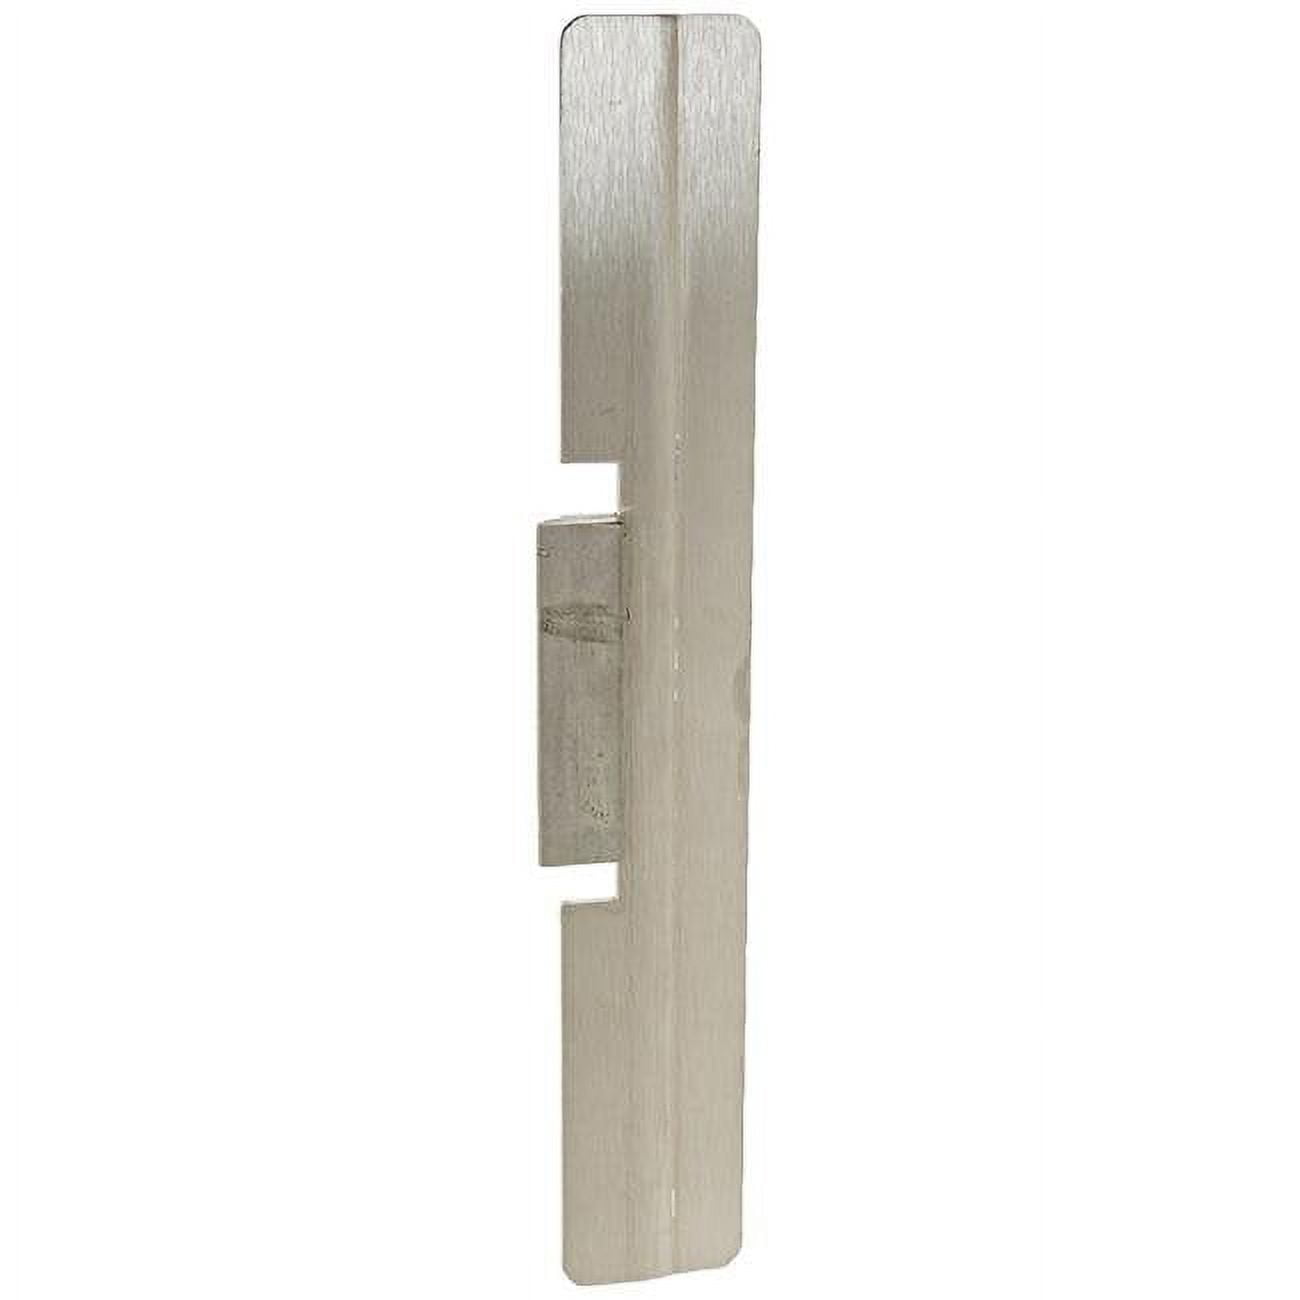 Fl 212w6 -wh 12 In. Full Lip High Security Strike With 6 In. Ctc Latch Holes, White Coated